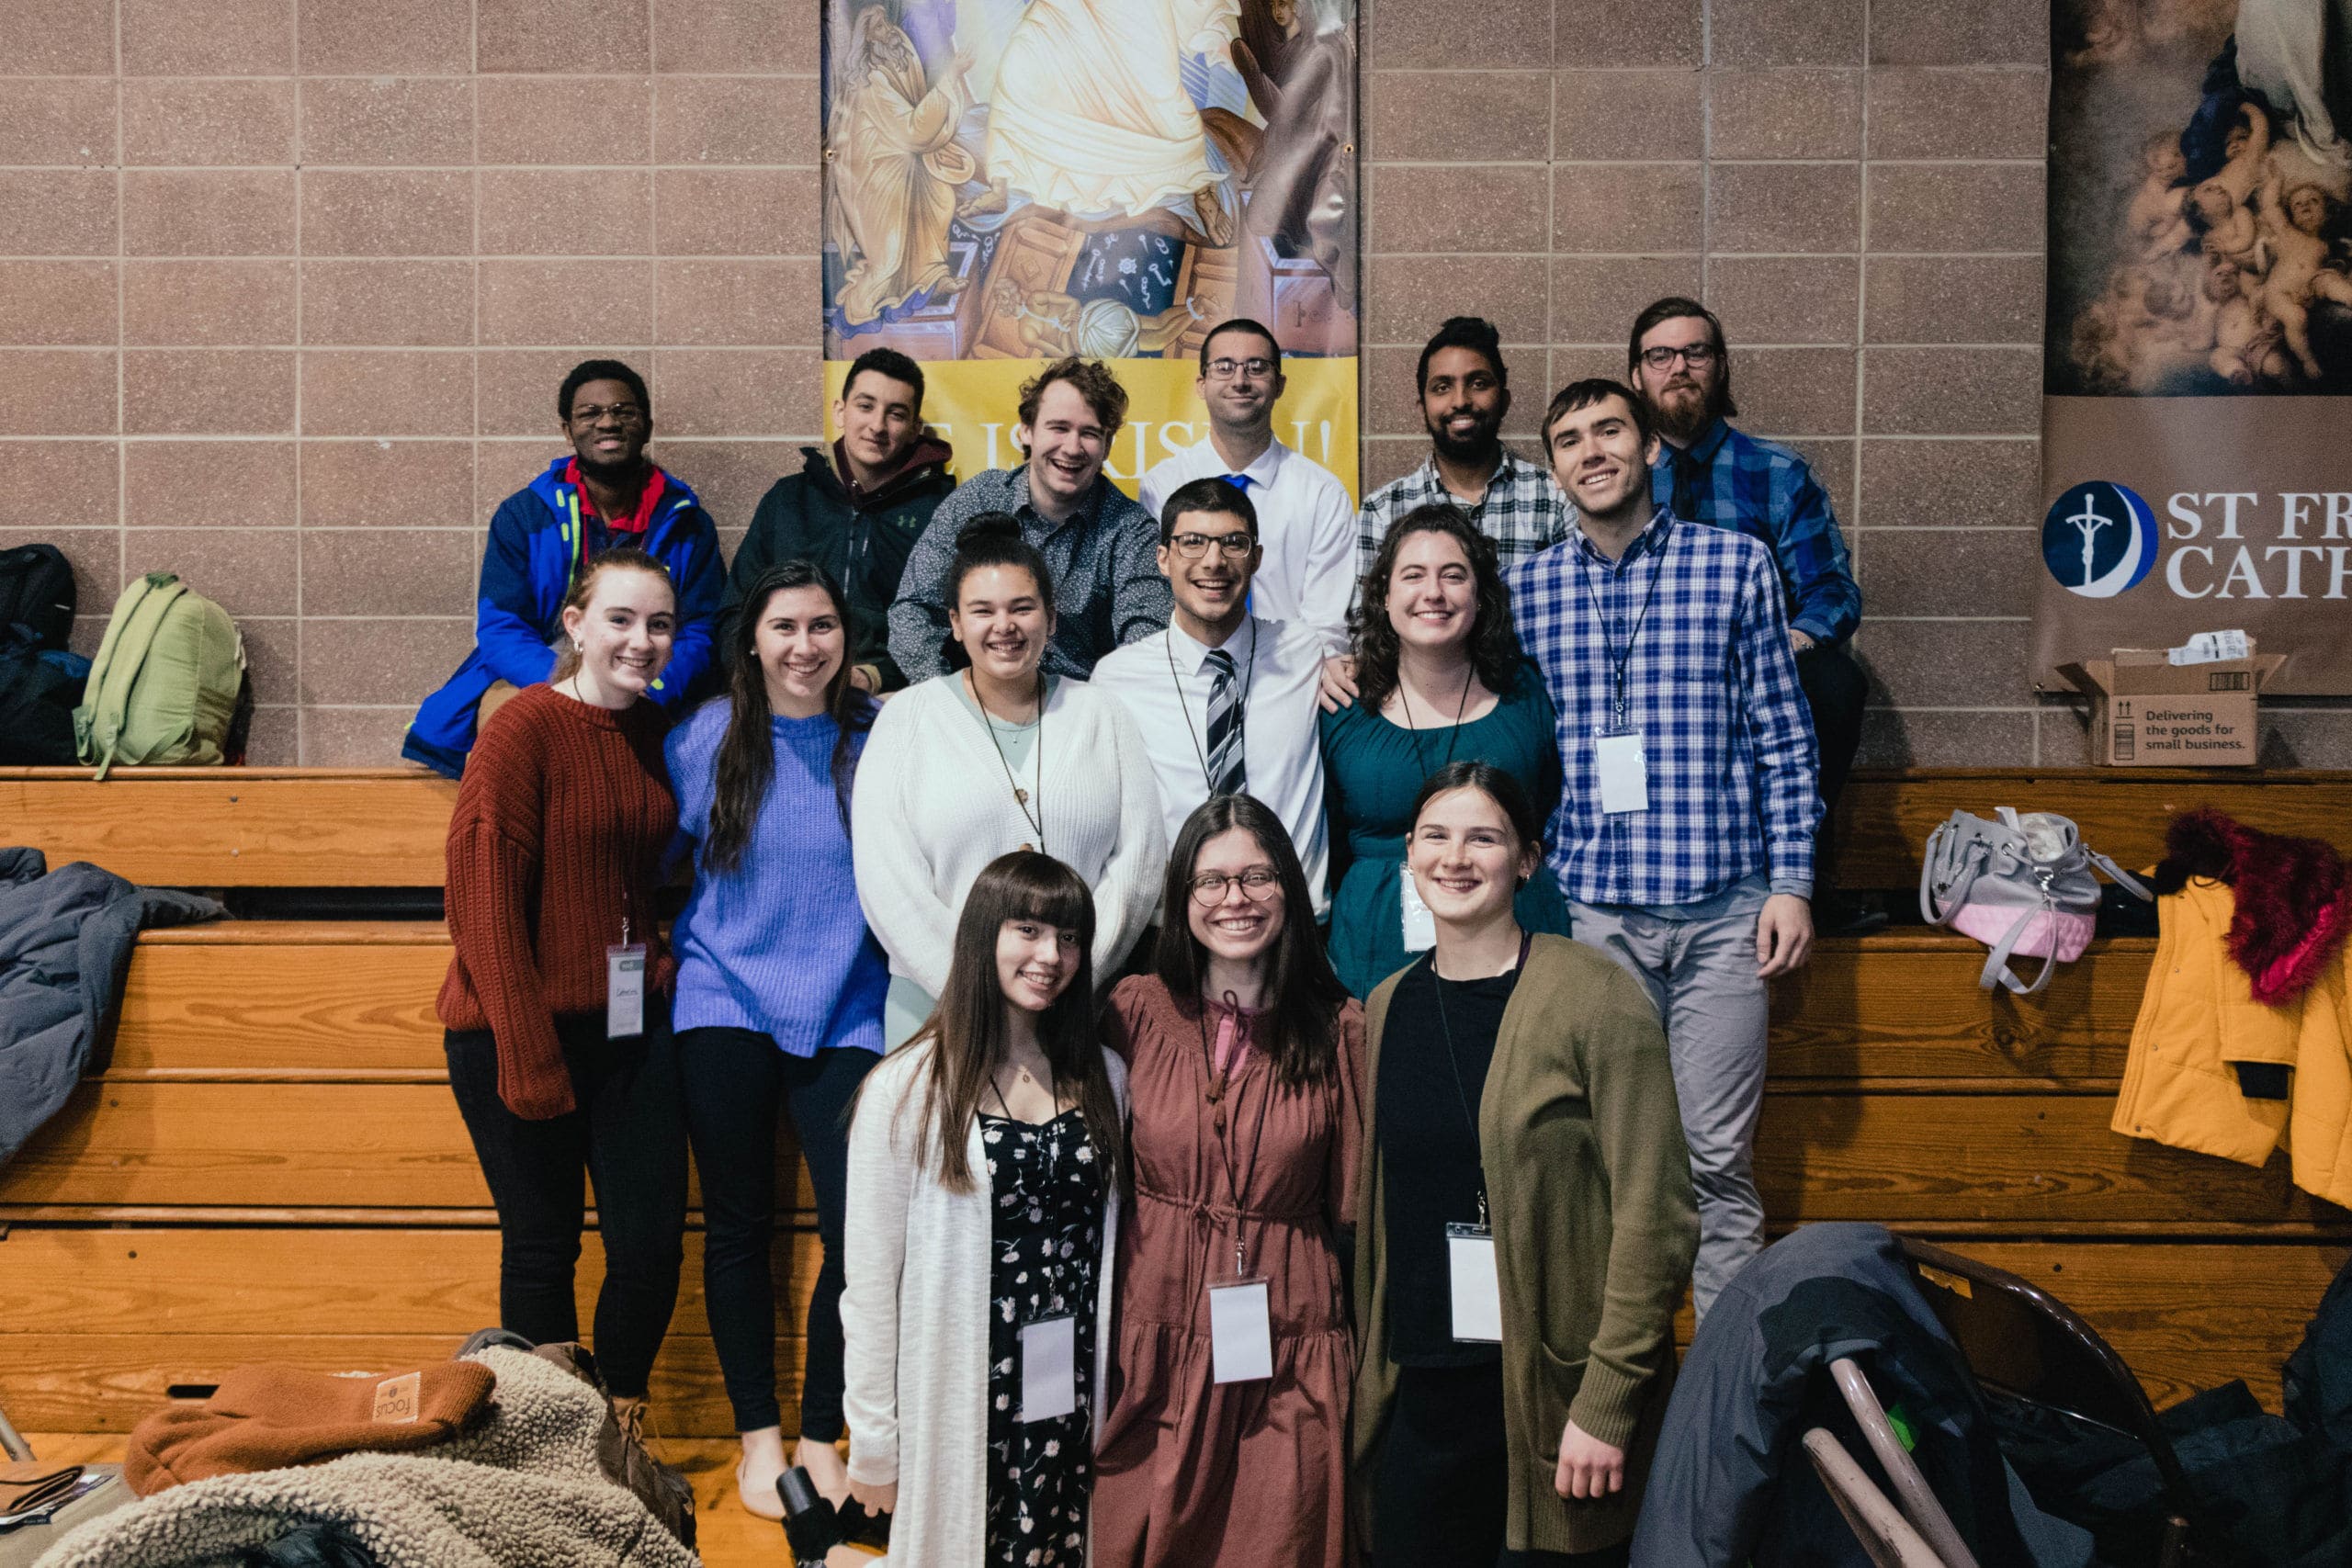 Local college students attended a national Catholic conference known as SEEK22 at Central Connecticut State University. (Photo courtesy of Vanessa Louise Cajes.